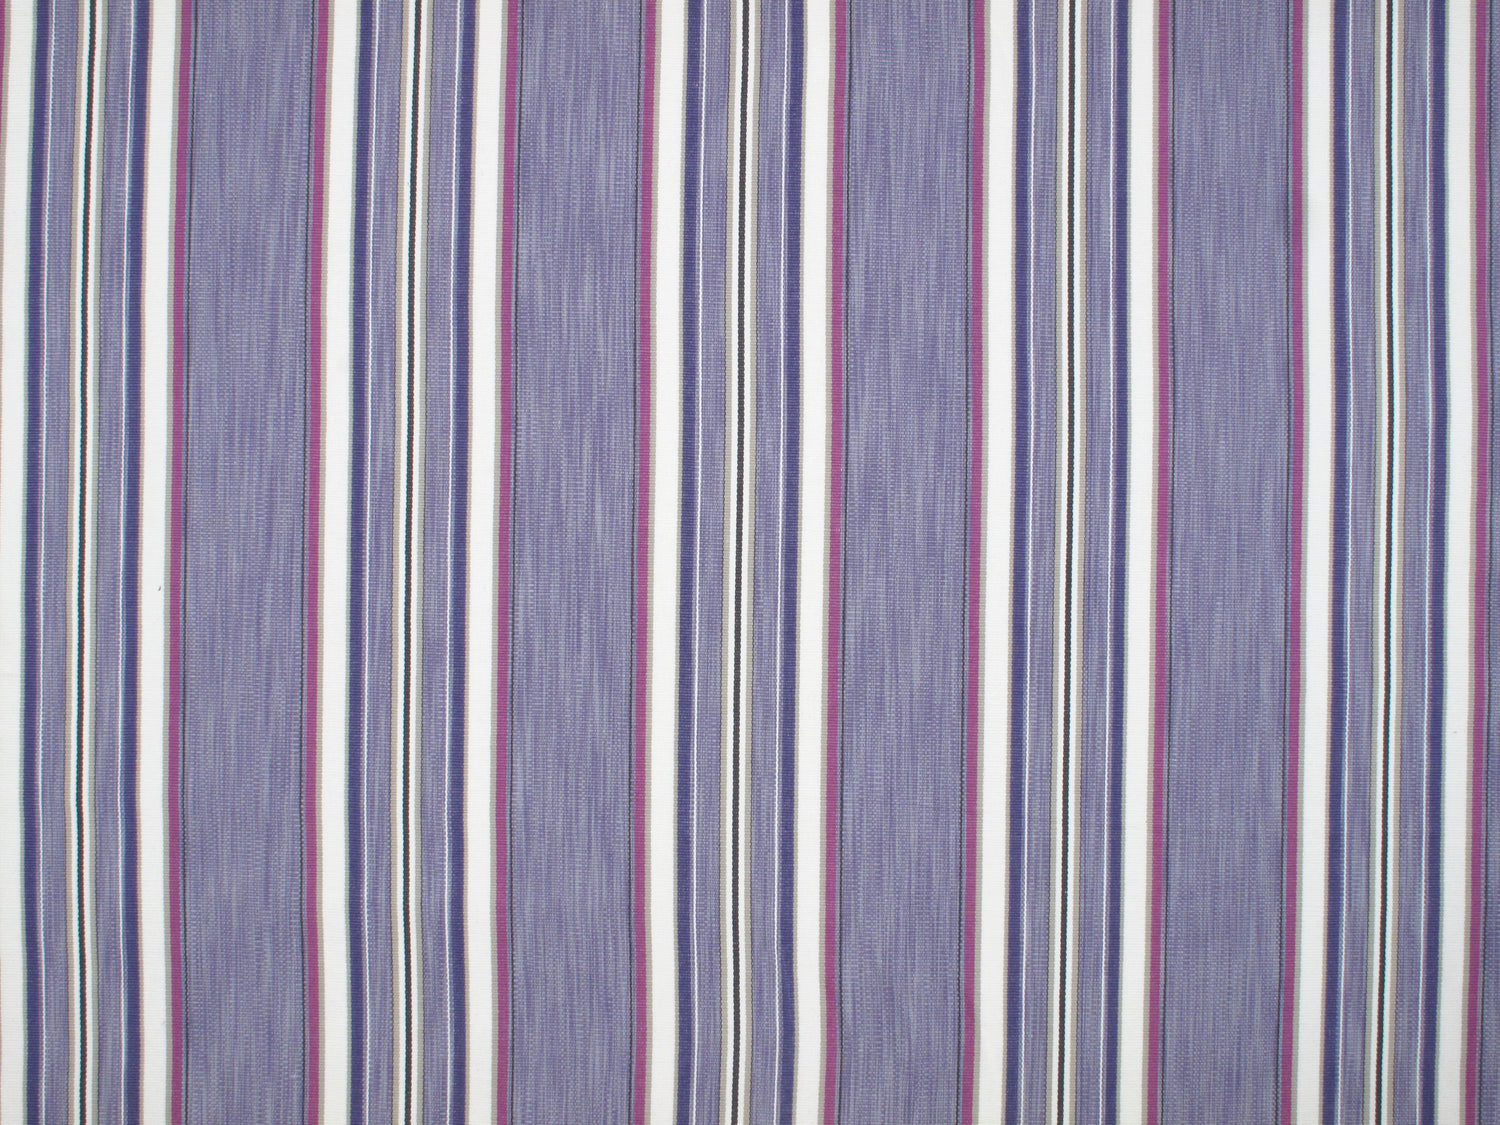 Bandos fabric in lilac color - pattern number PQ 0002A168 - by Scalamandre in the Old World Weavers collection